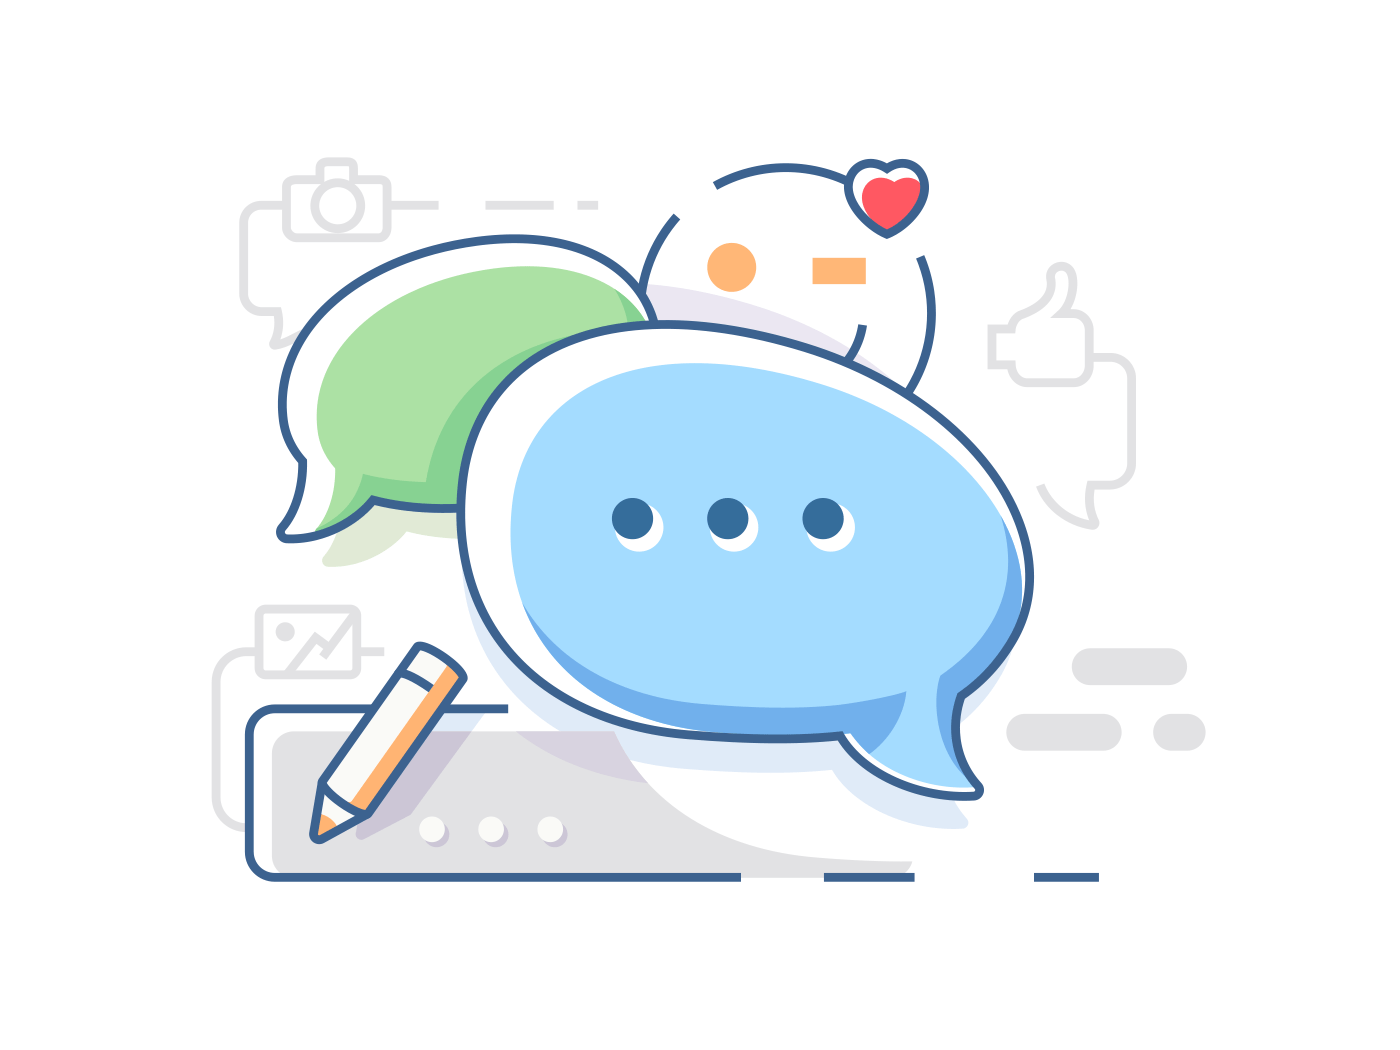 Connect and chat chatting illustration